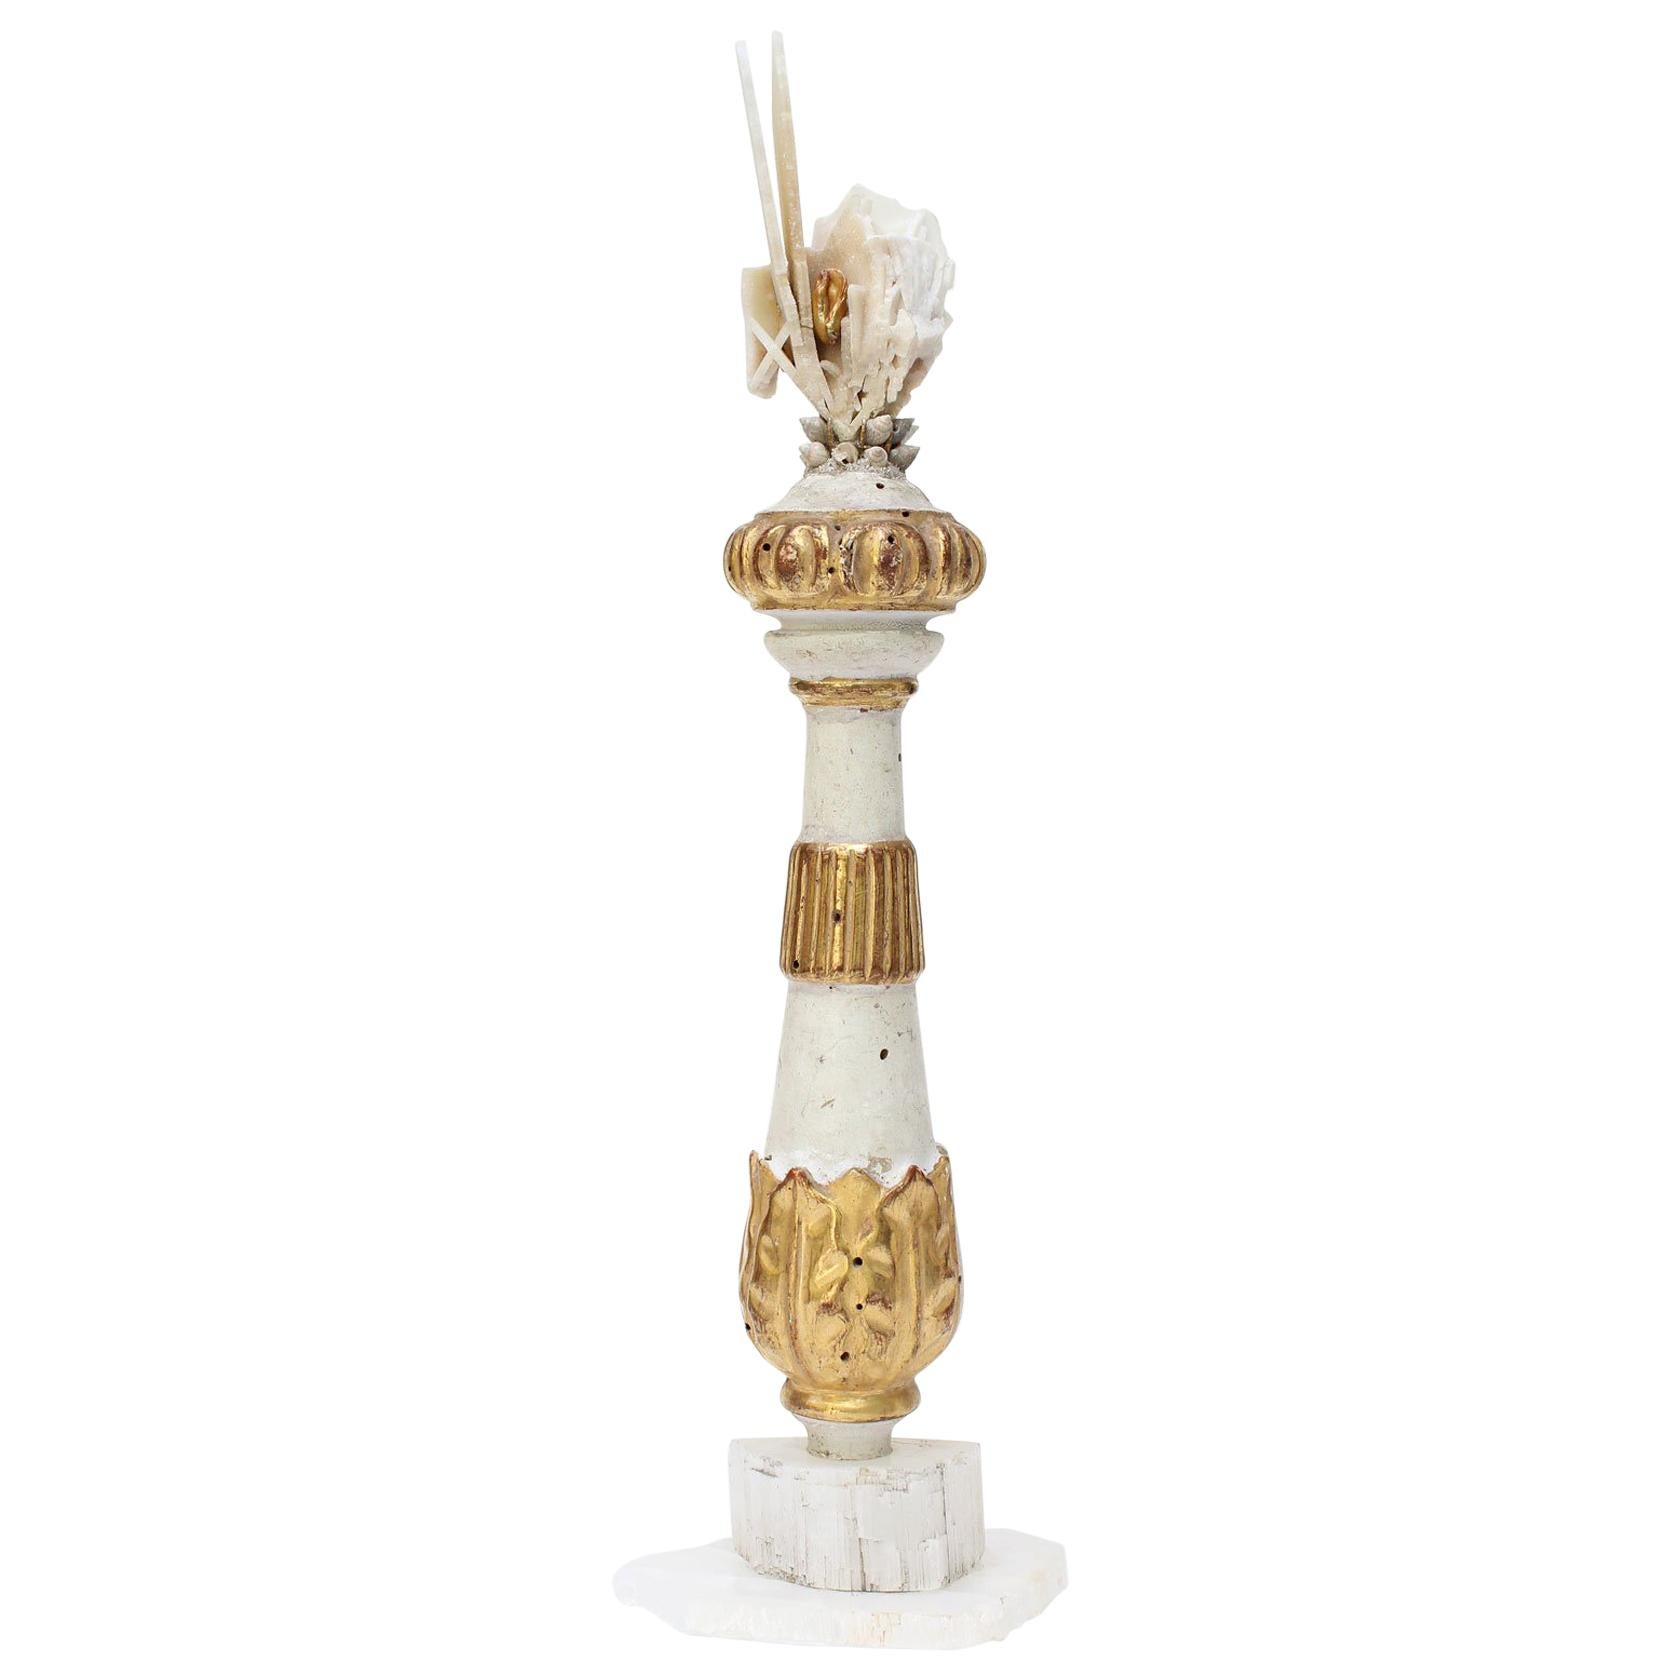 18th Century Italian Candlestick with Angle Plated Quartz & Pearl on Selenite